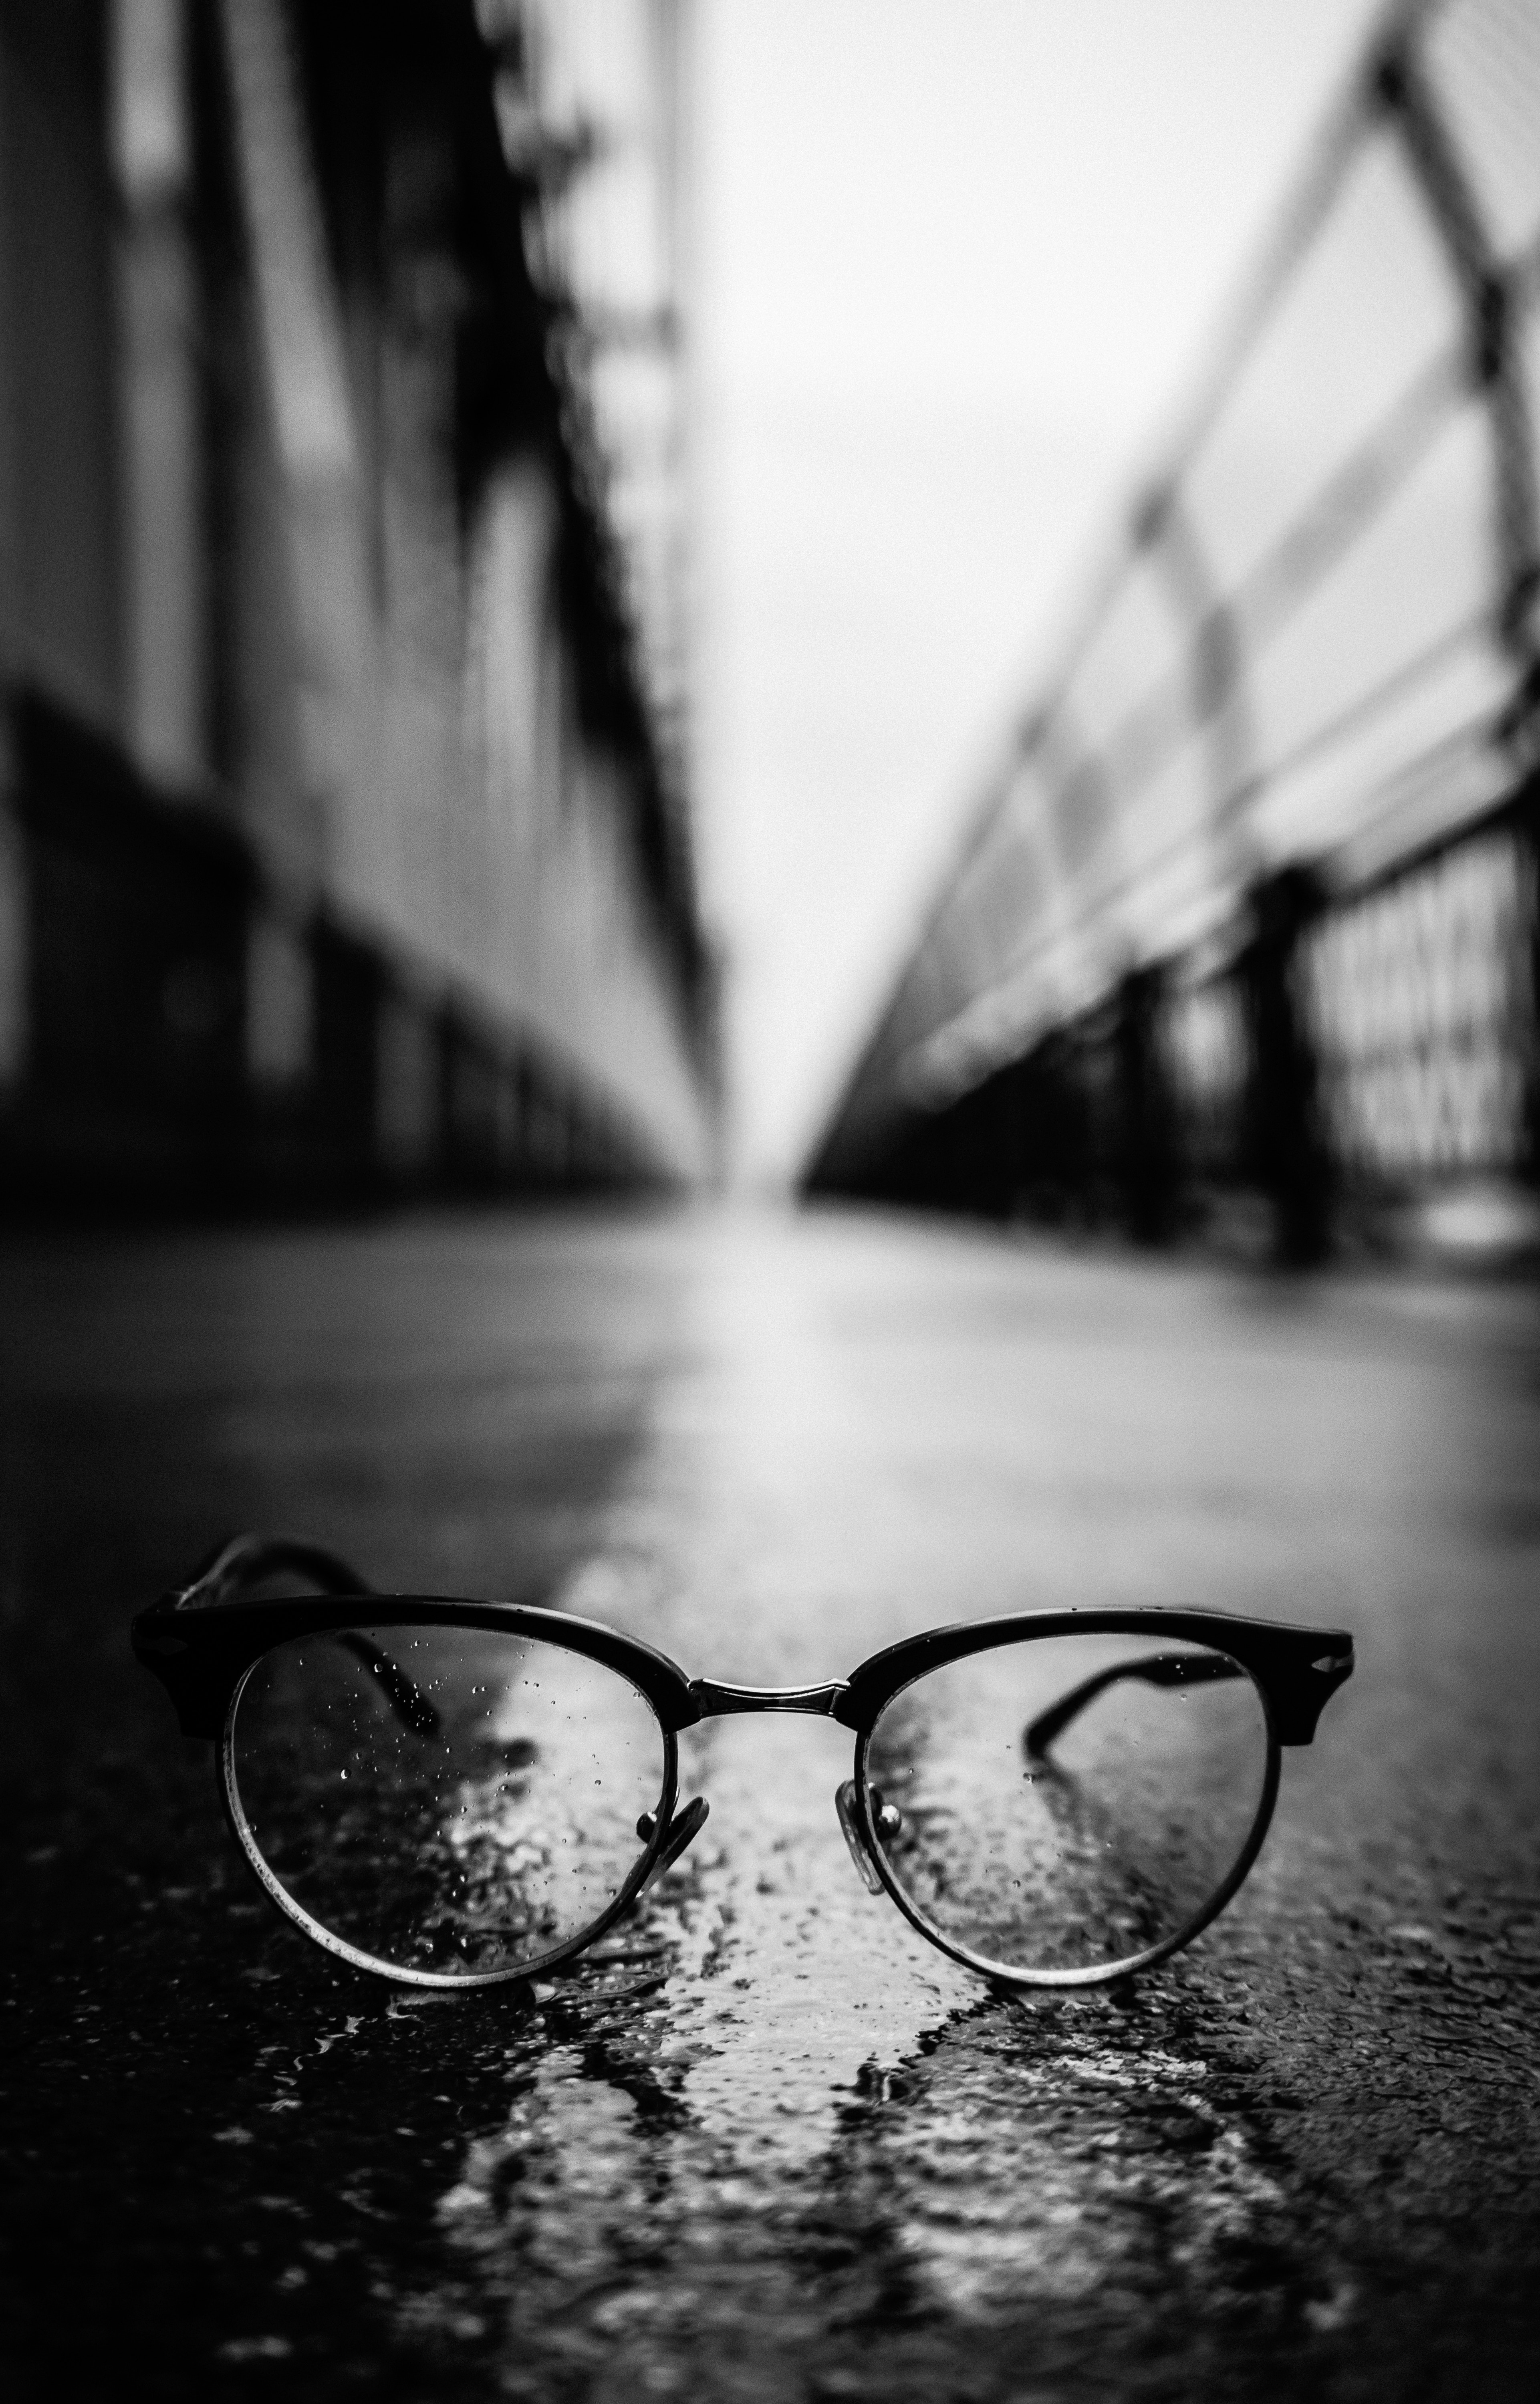 close up, bw, dark, chb, glasses, spectacles iphone wallpaper